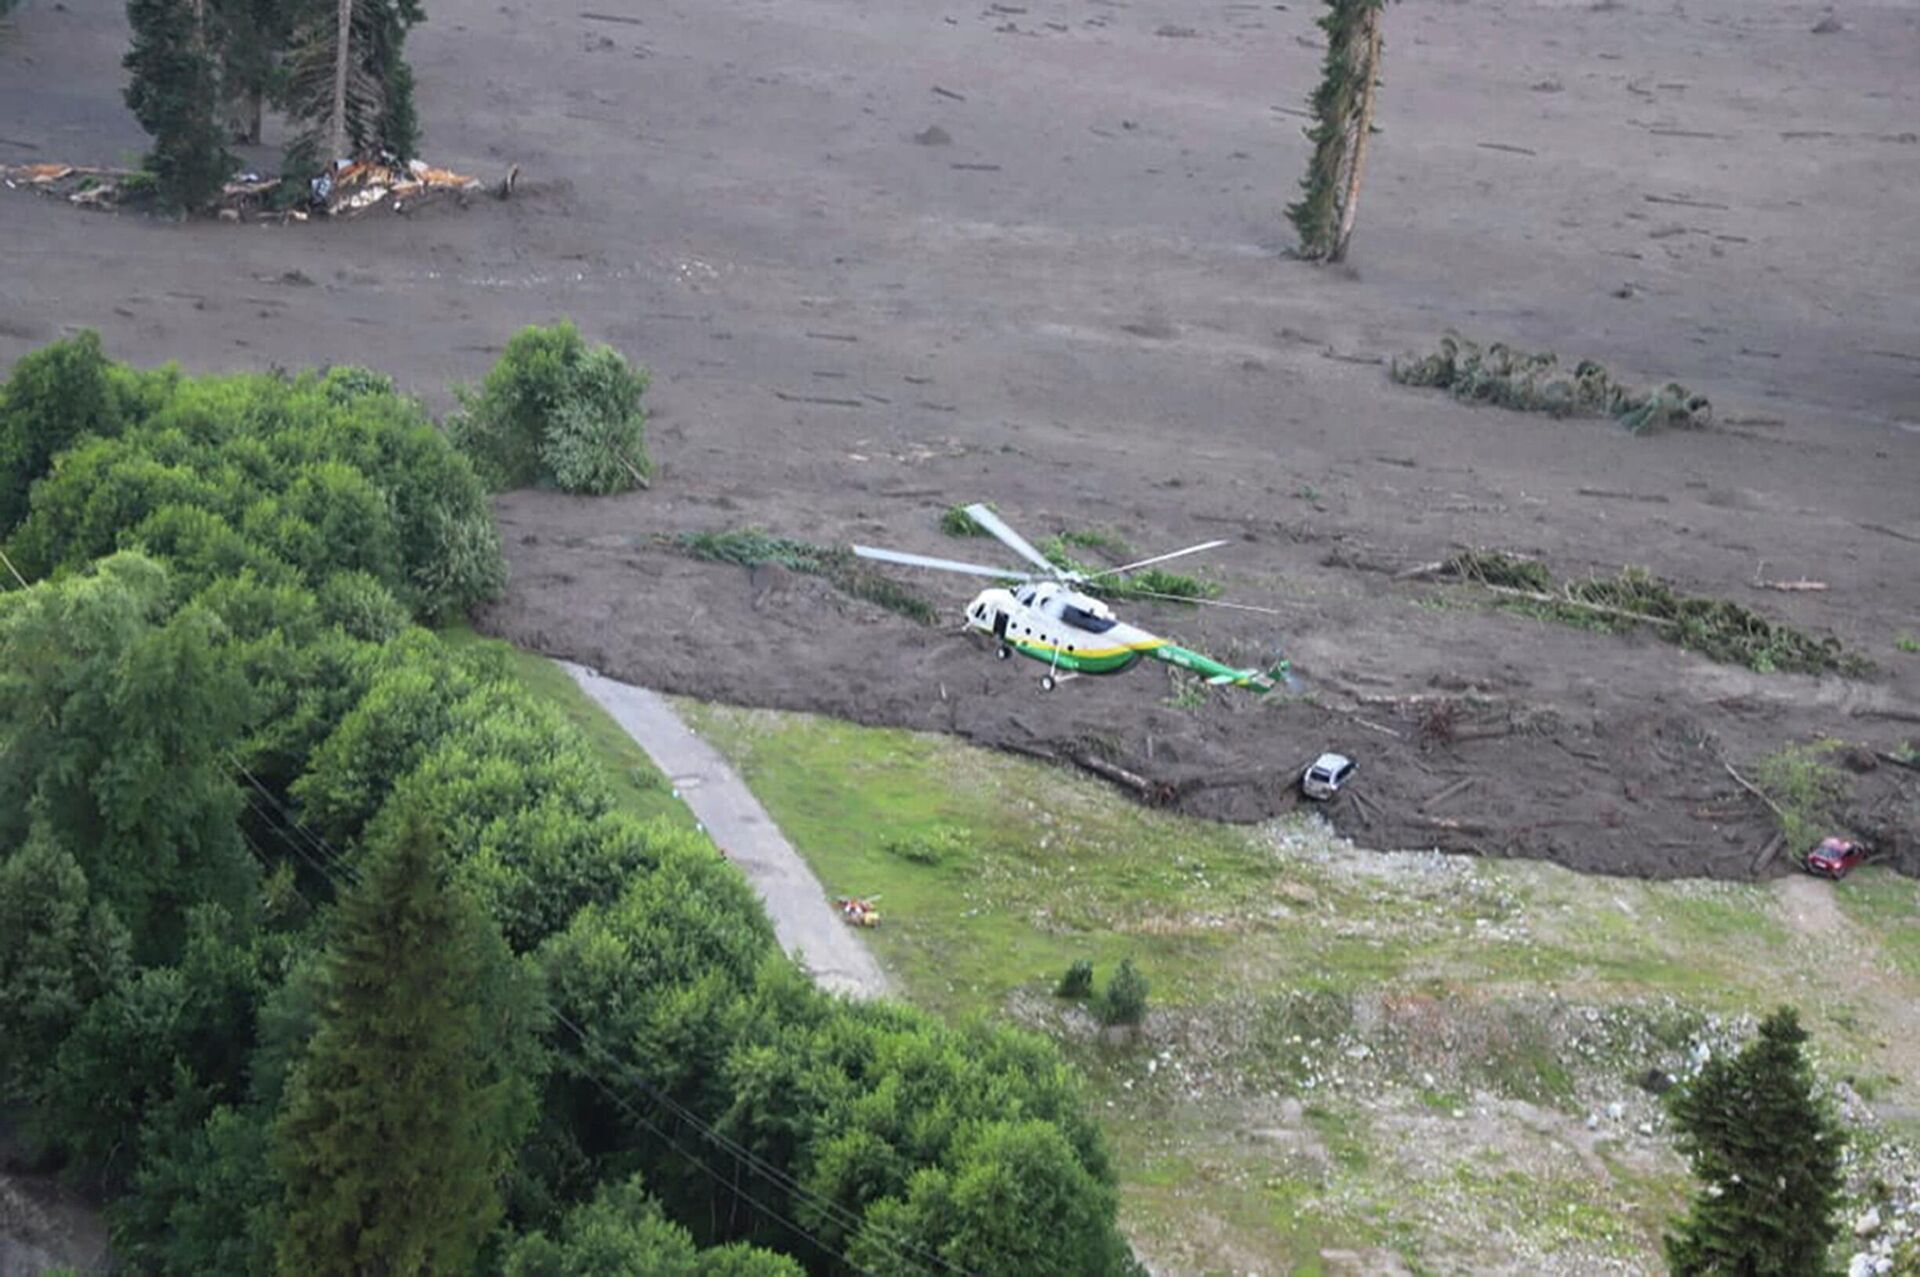 In this image provided by Ministry of Internal Affairs of Georgia press service, a rescue helicopter flies over a landslide area near Shovi, about 140 kilometers (85 miles) northwest of the capital Tbilisi, Georgia, Friday, Aug. 4, 2023. At least seven people were killed and more than 30 are missing after a landslide hit a resort area in the mountains of the country of Georgia, officials and news reports said Friday.  - Sputnik International, 1920, 06.08.2023